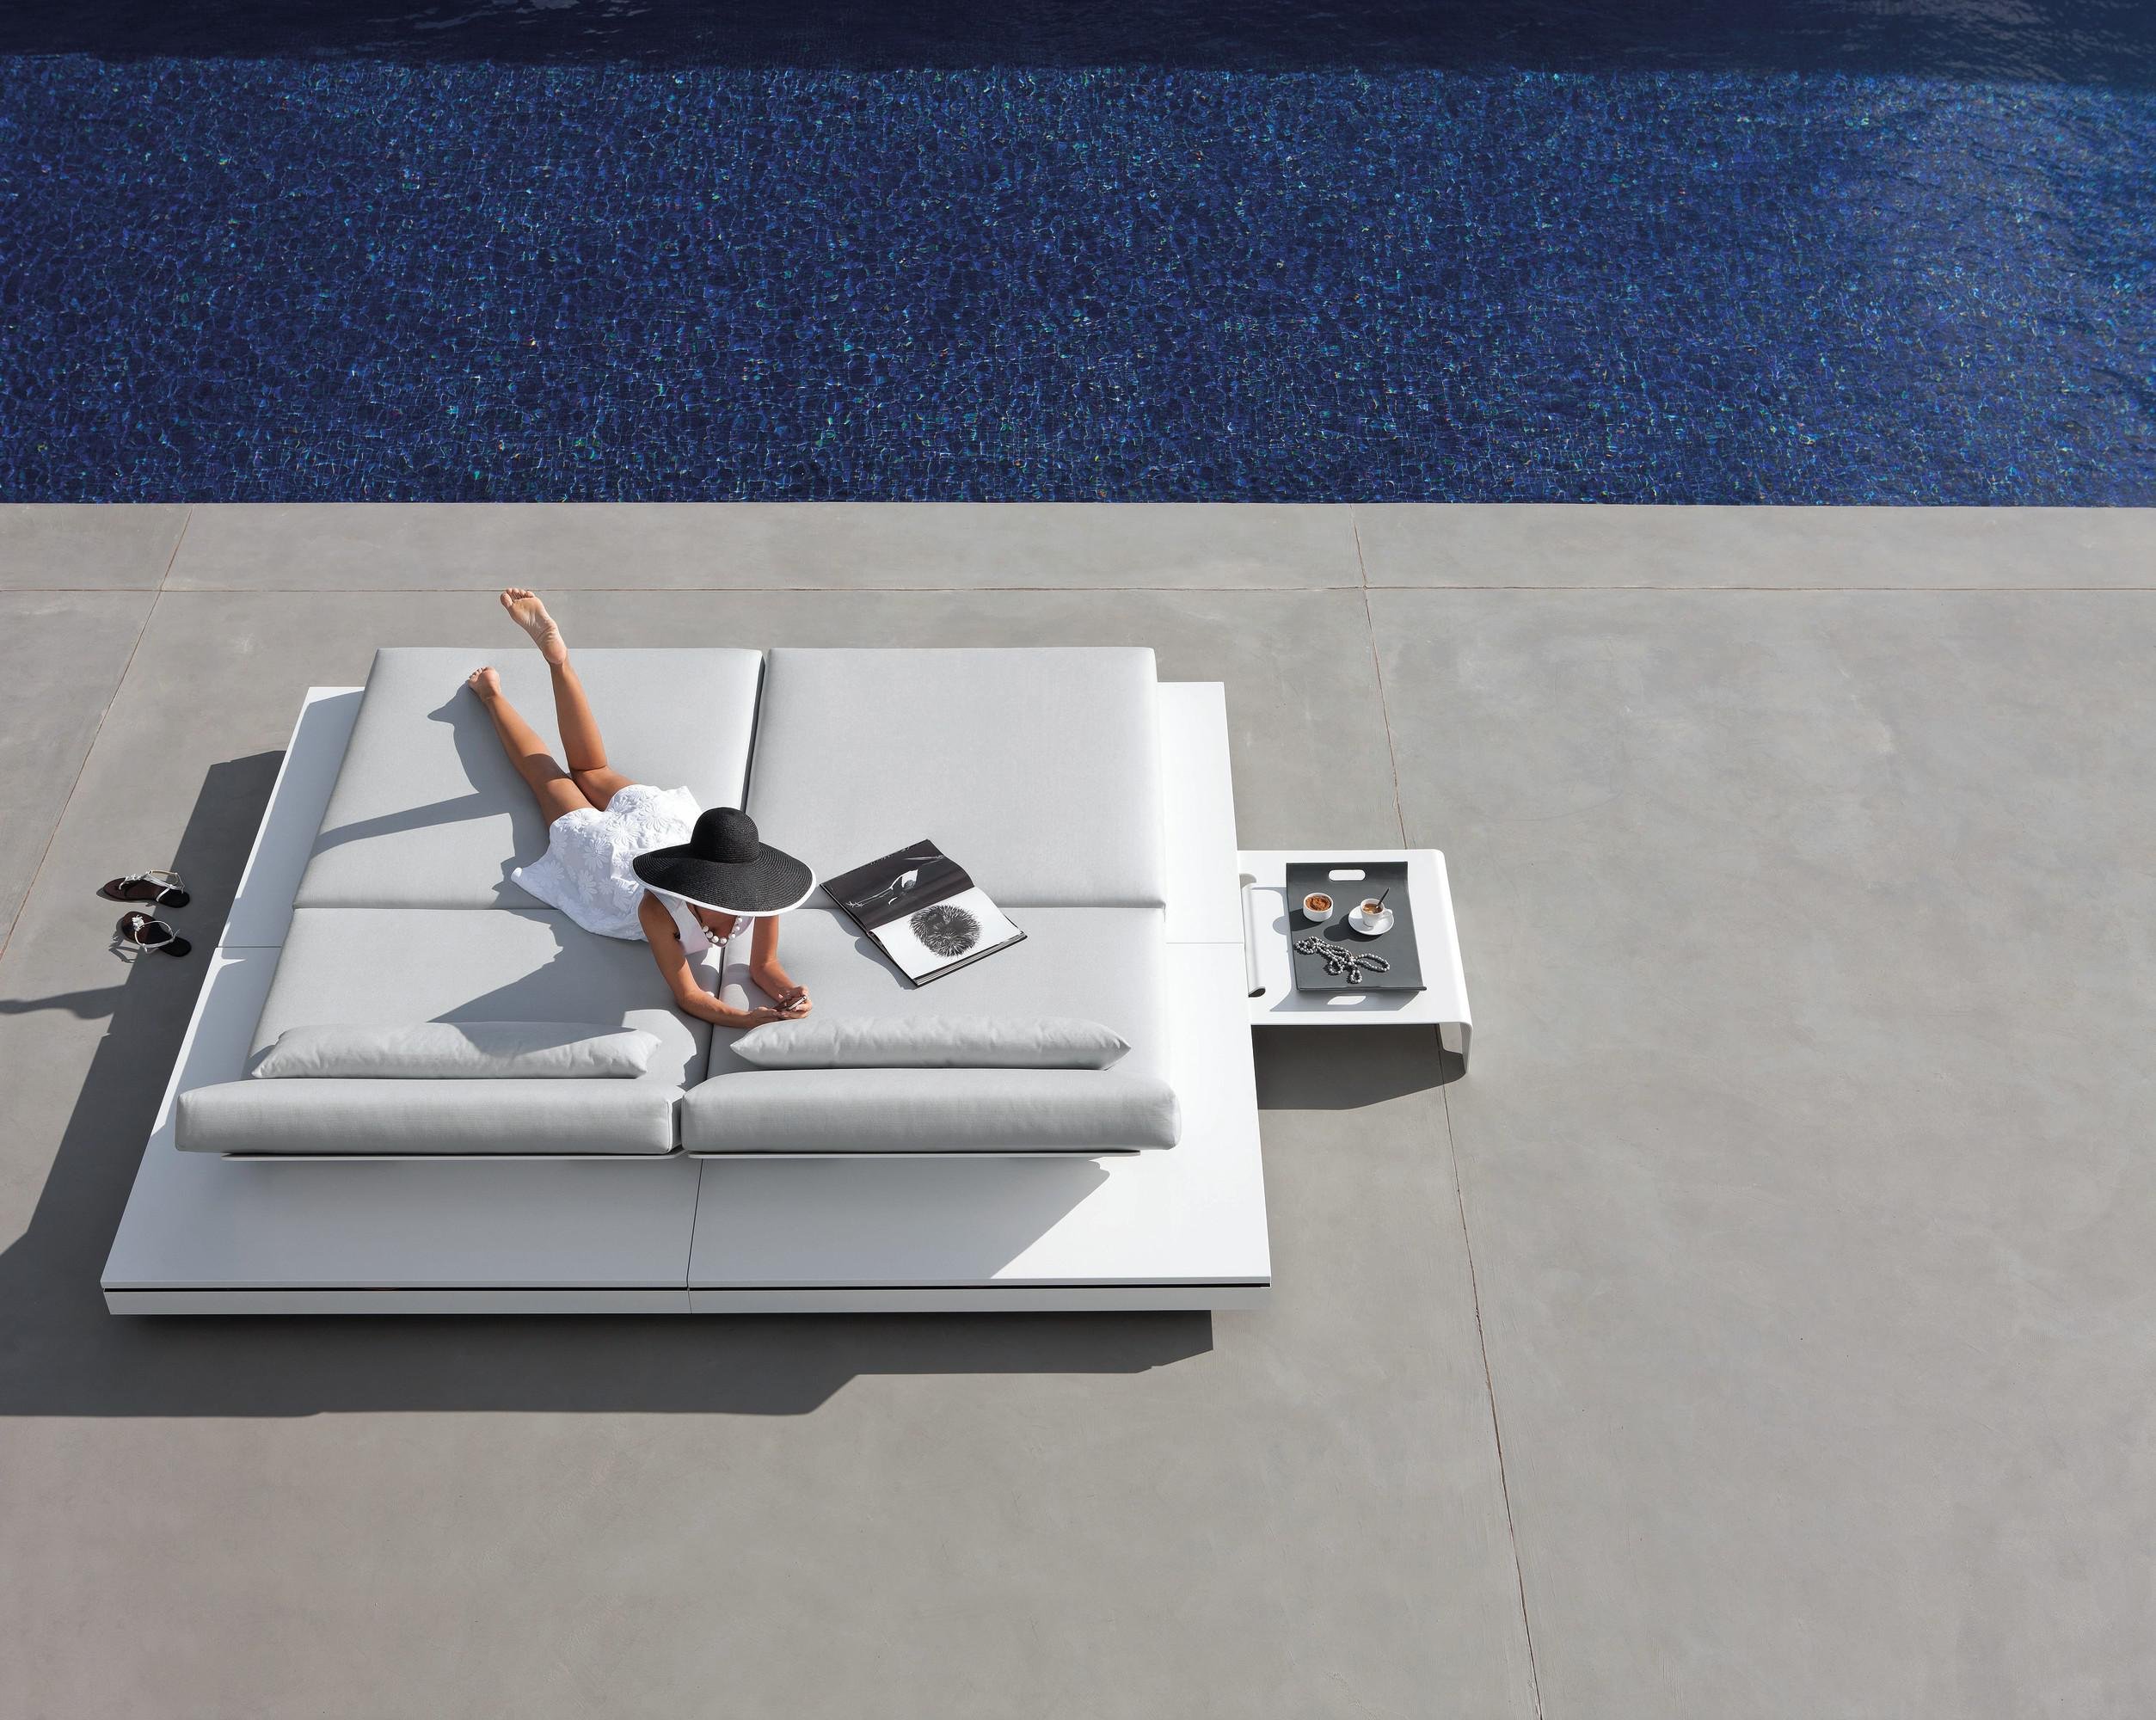 Elements Lounger sunbed from Manutti, designed by Gerd Couckhuyt